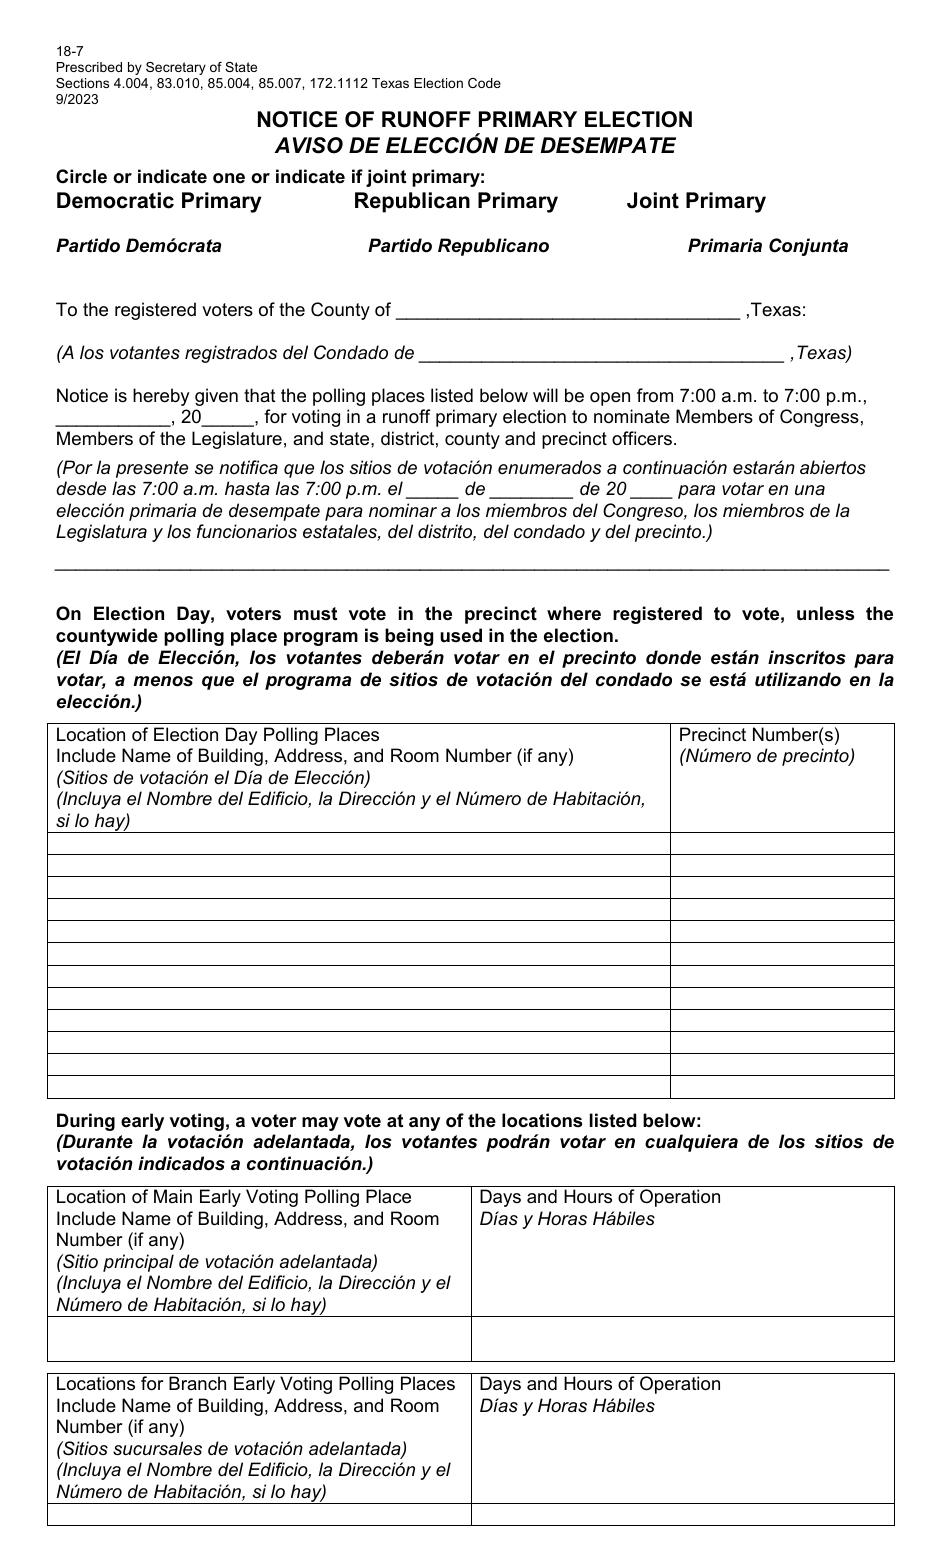 Form 18-7 Notice of Runoff Primary Election - Texas (English / Spanish), Page 1